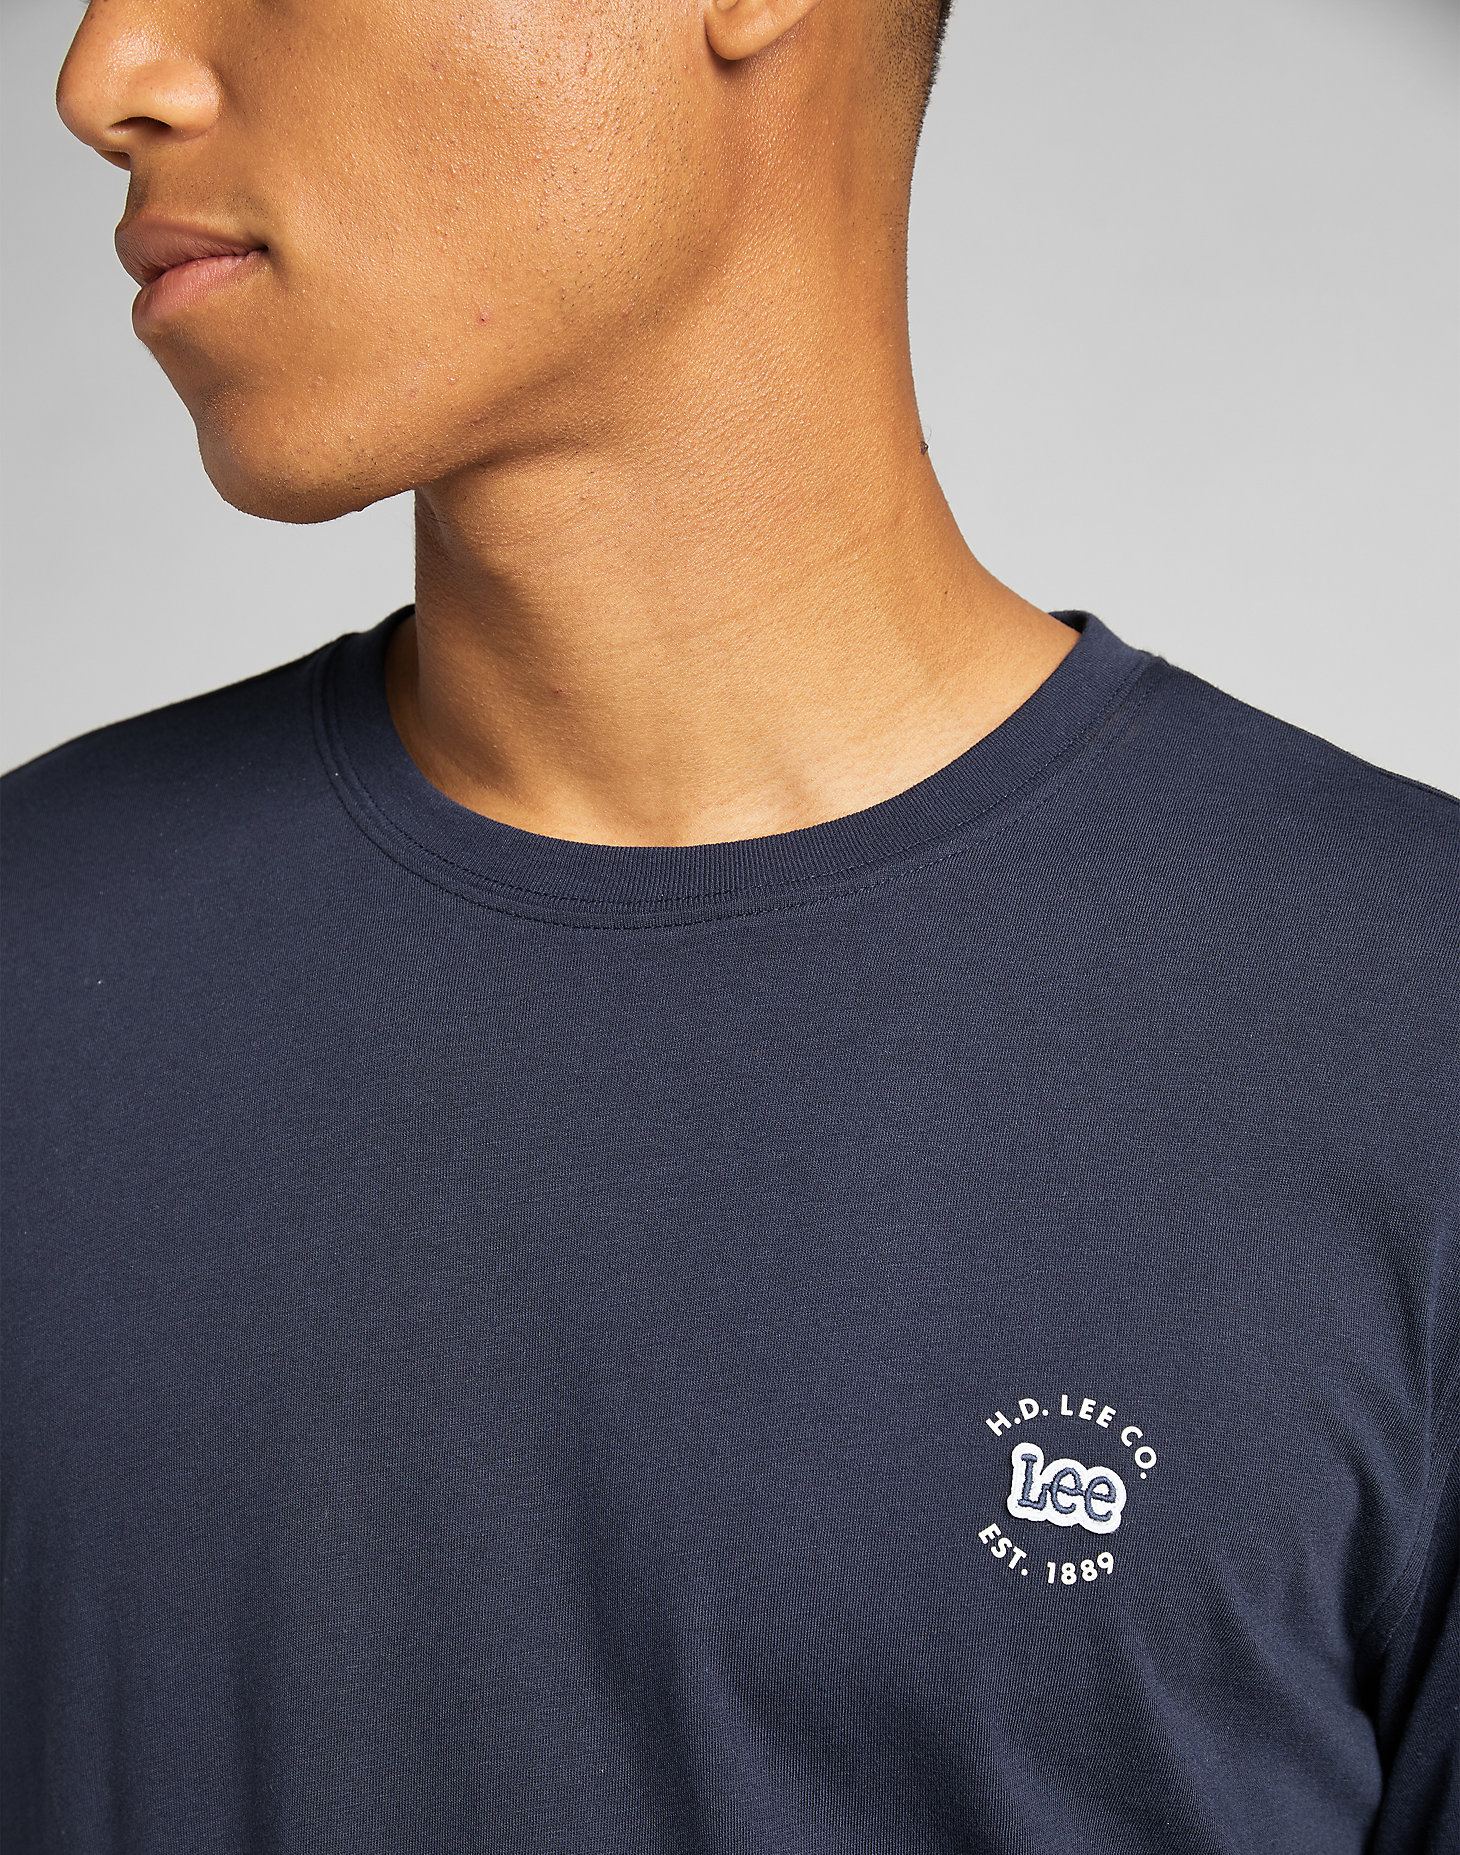 Long Sleeve Patch Logo Tee in Navy alternative view 4